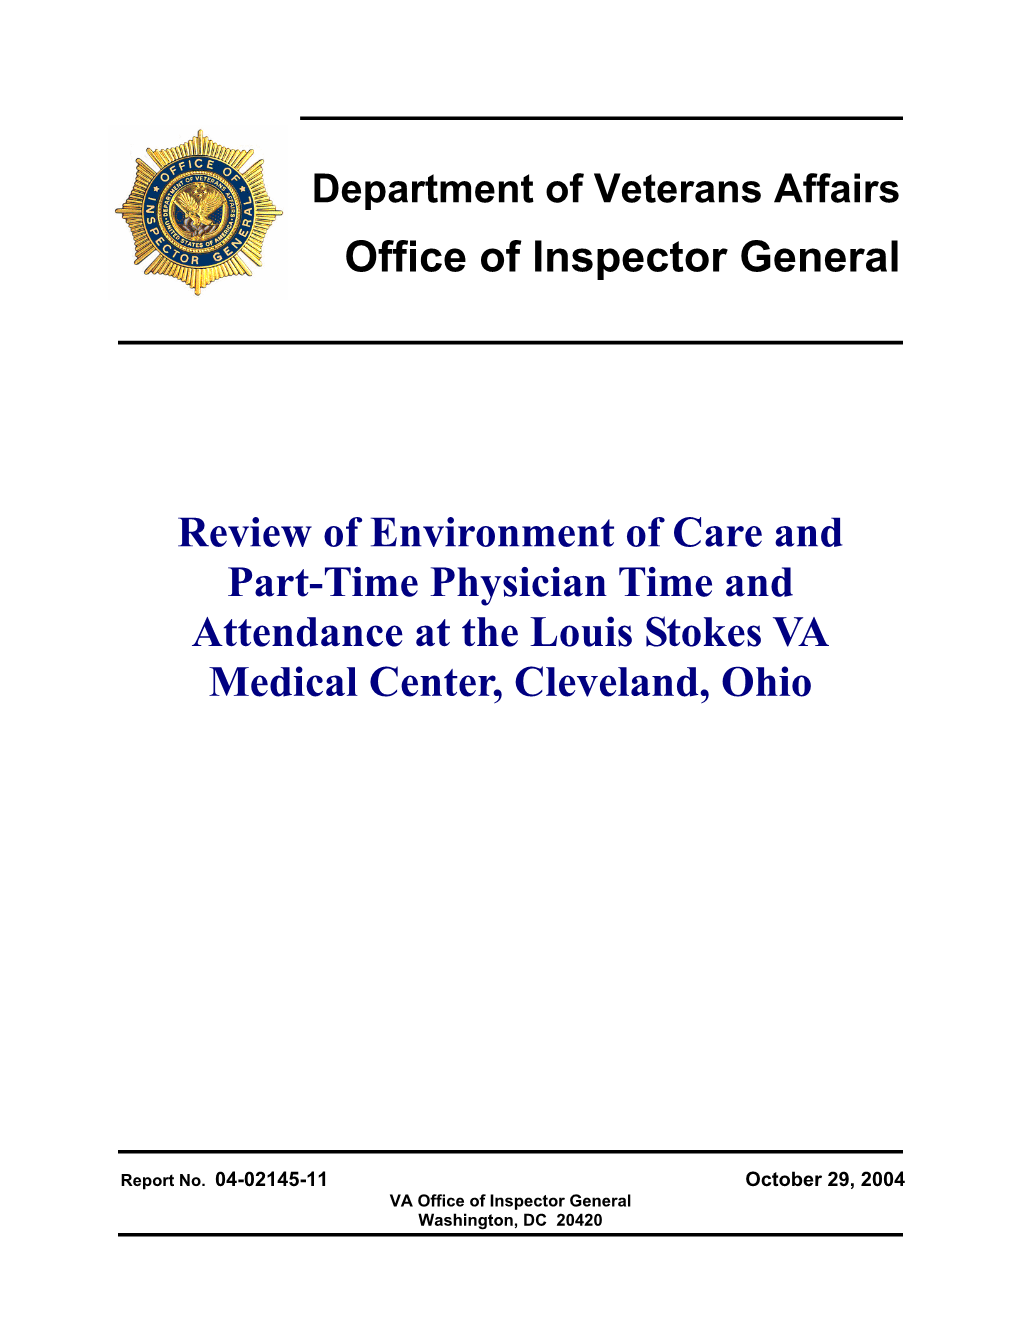 Review of Environment of Care and Part-Time Physician Time and Attendance at the Louis Stokes VA Medical Center, Cleveland, Ohio